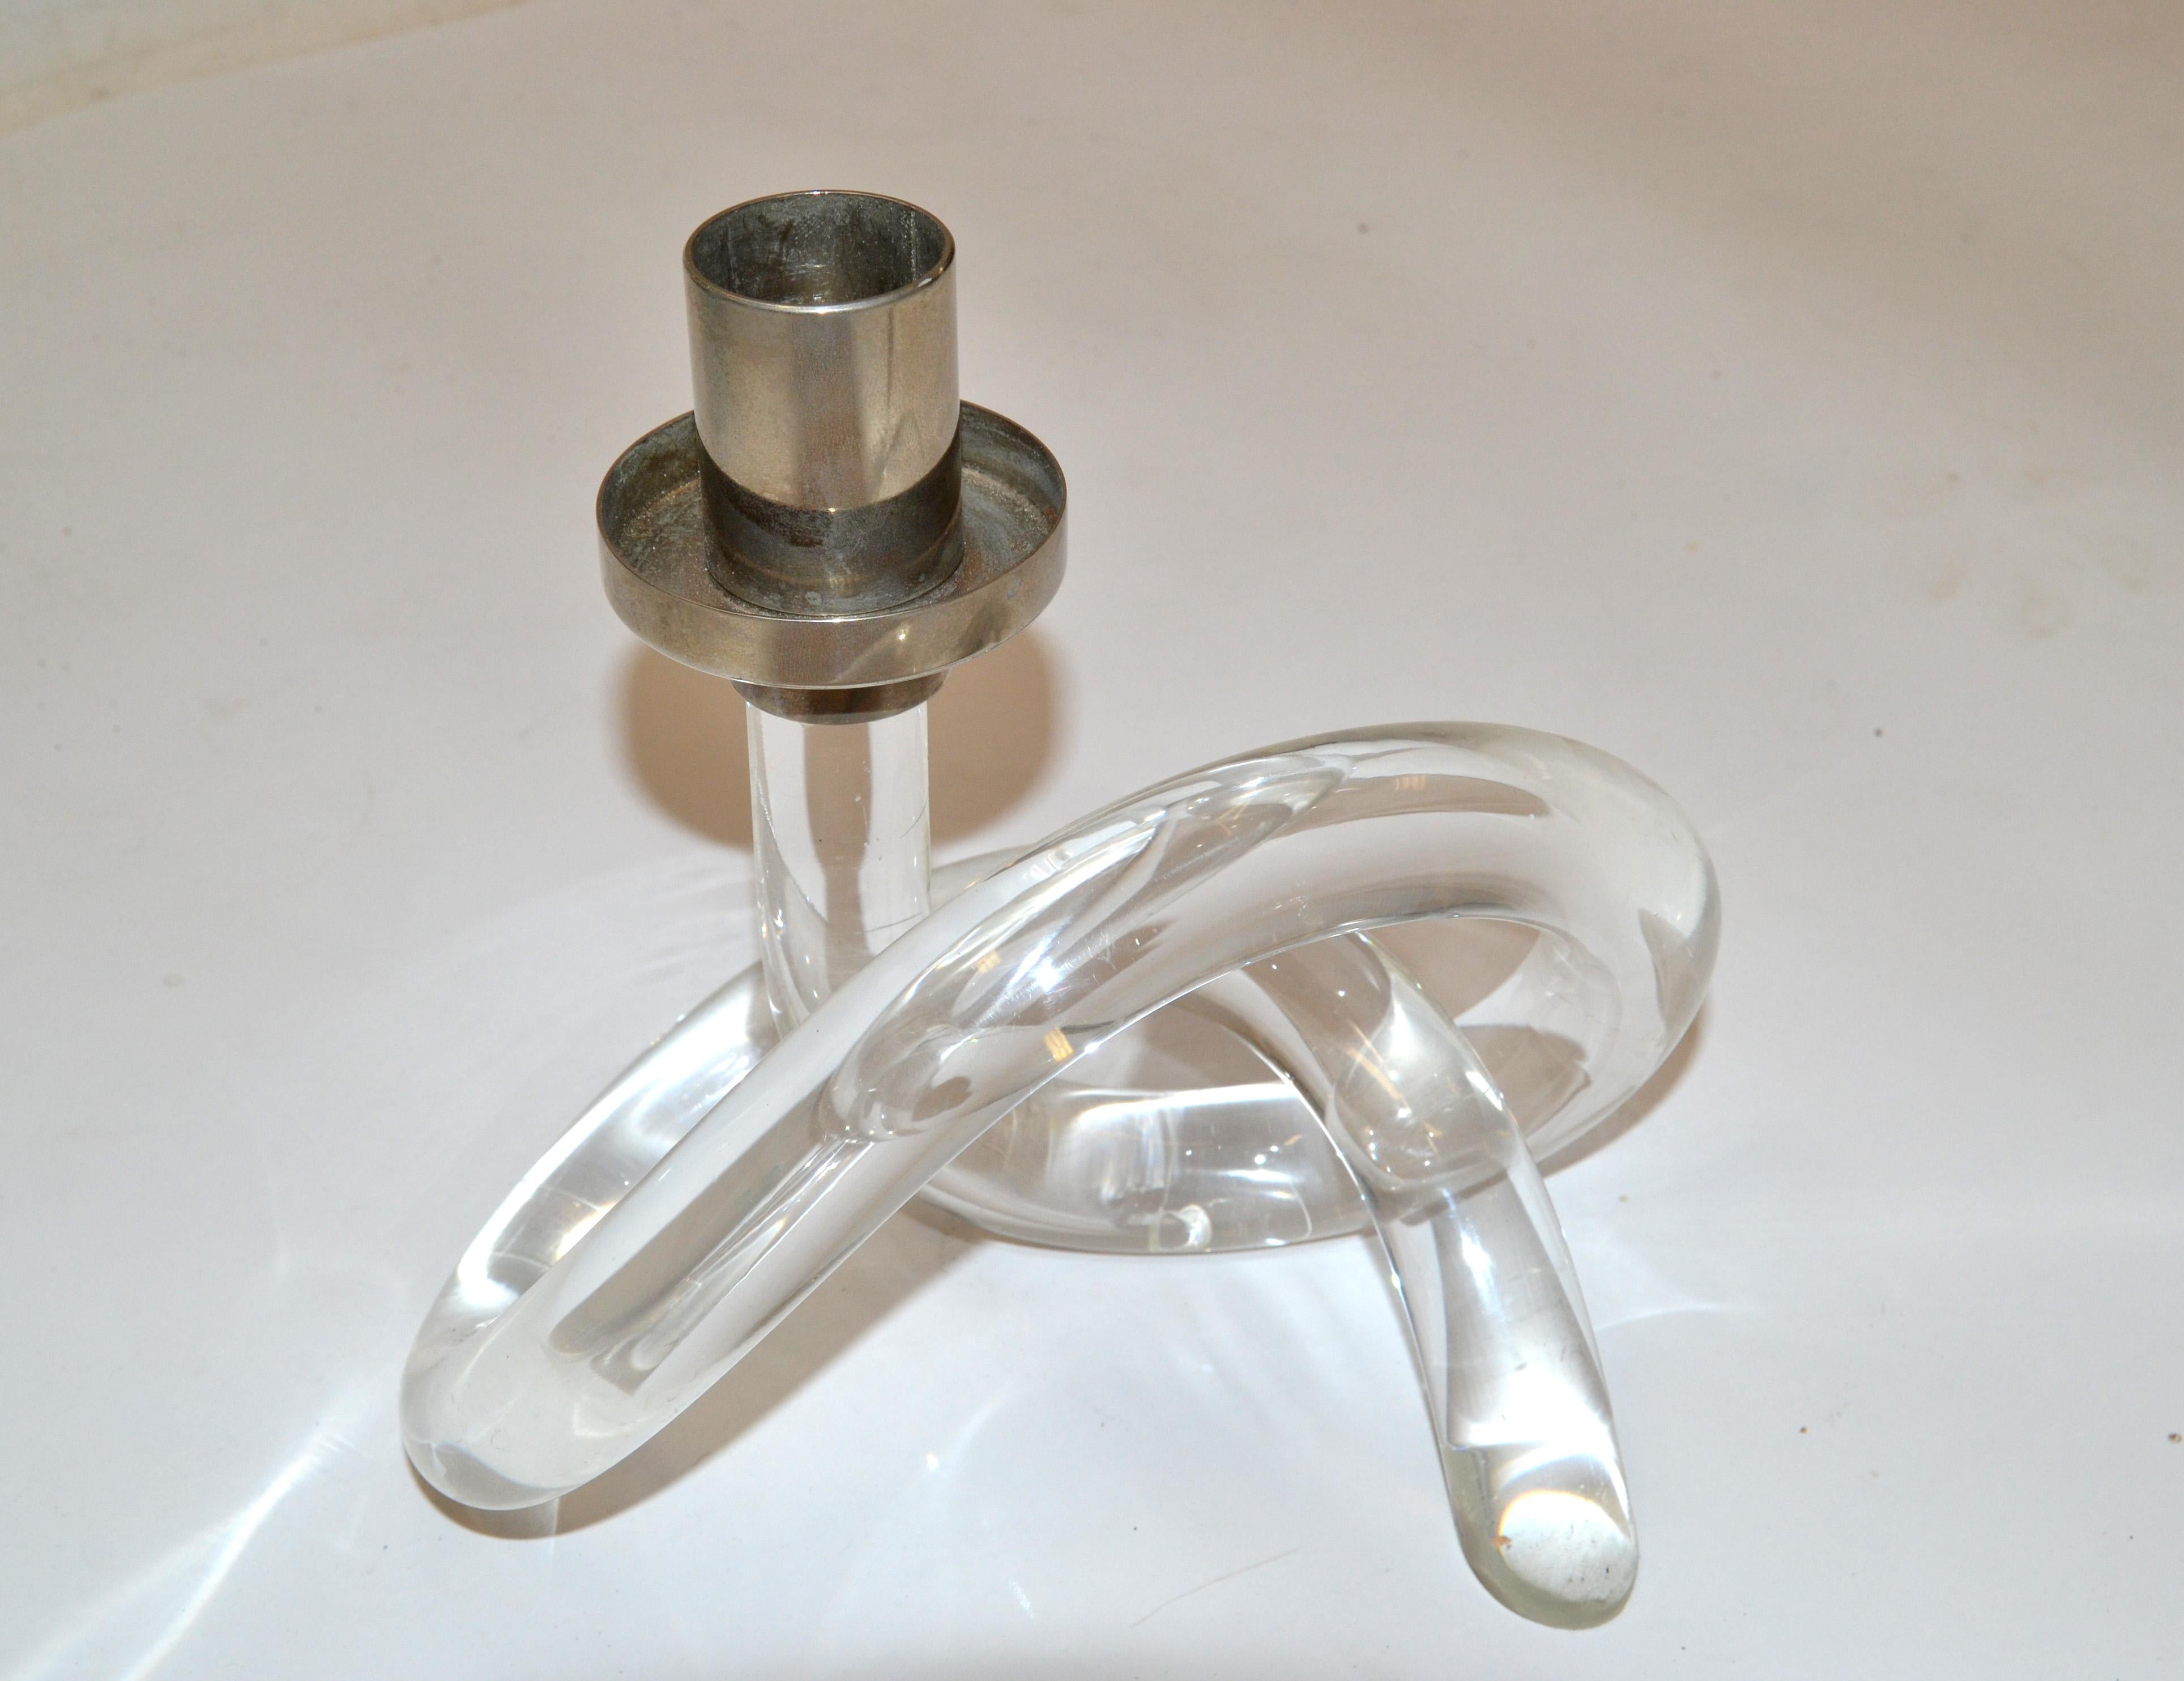 Beautiful, rare Candleholder by Dorothy Thorpe made in America in the 1970.
Bend Lucite in pretzel shape with a nickel top for a 2.5 diameter candle.
In original vintage condition with some crazing to the Lucite.